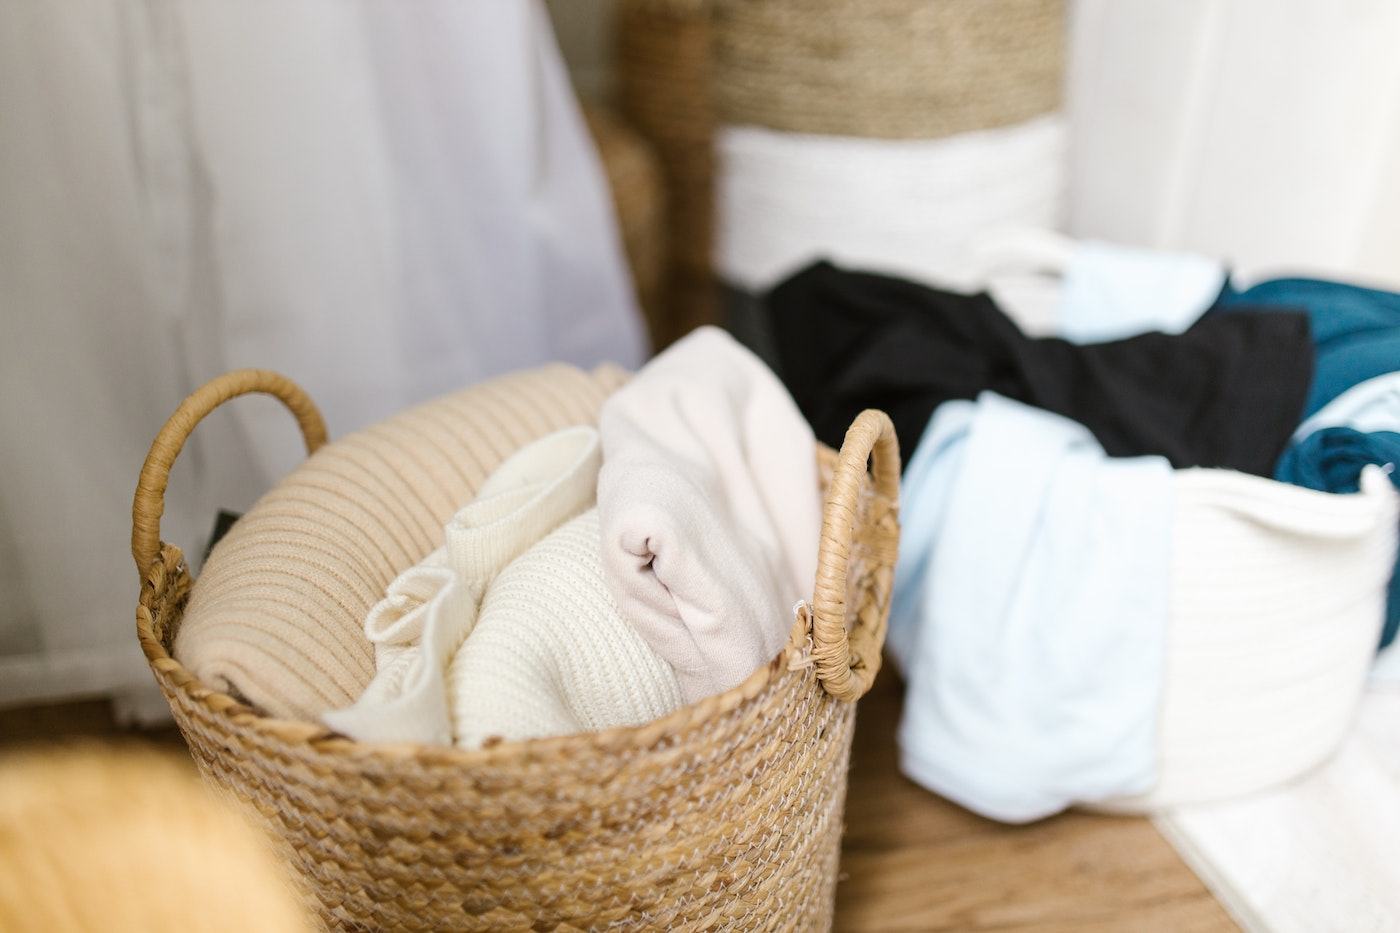 laundry in baskets - tips for making your wardrobe more sustainable